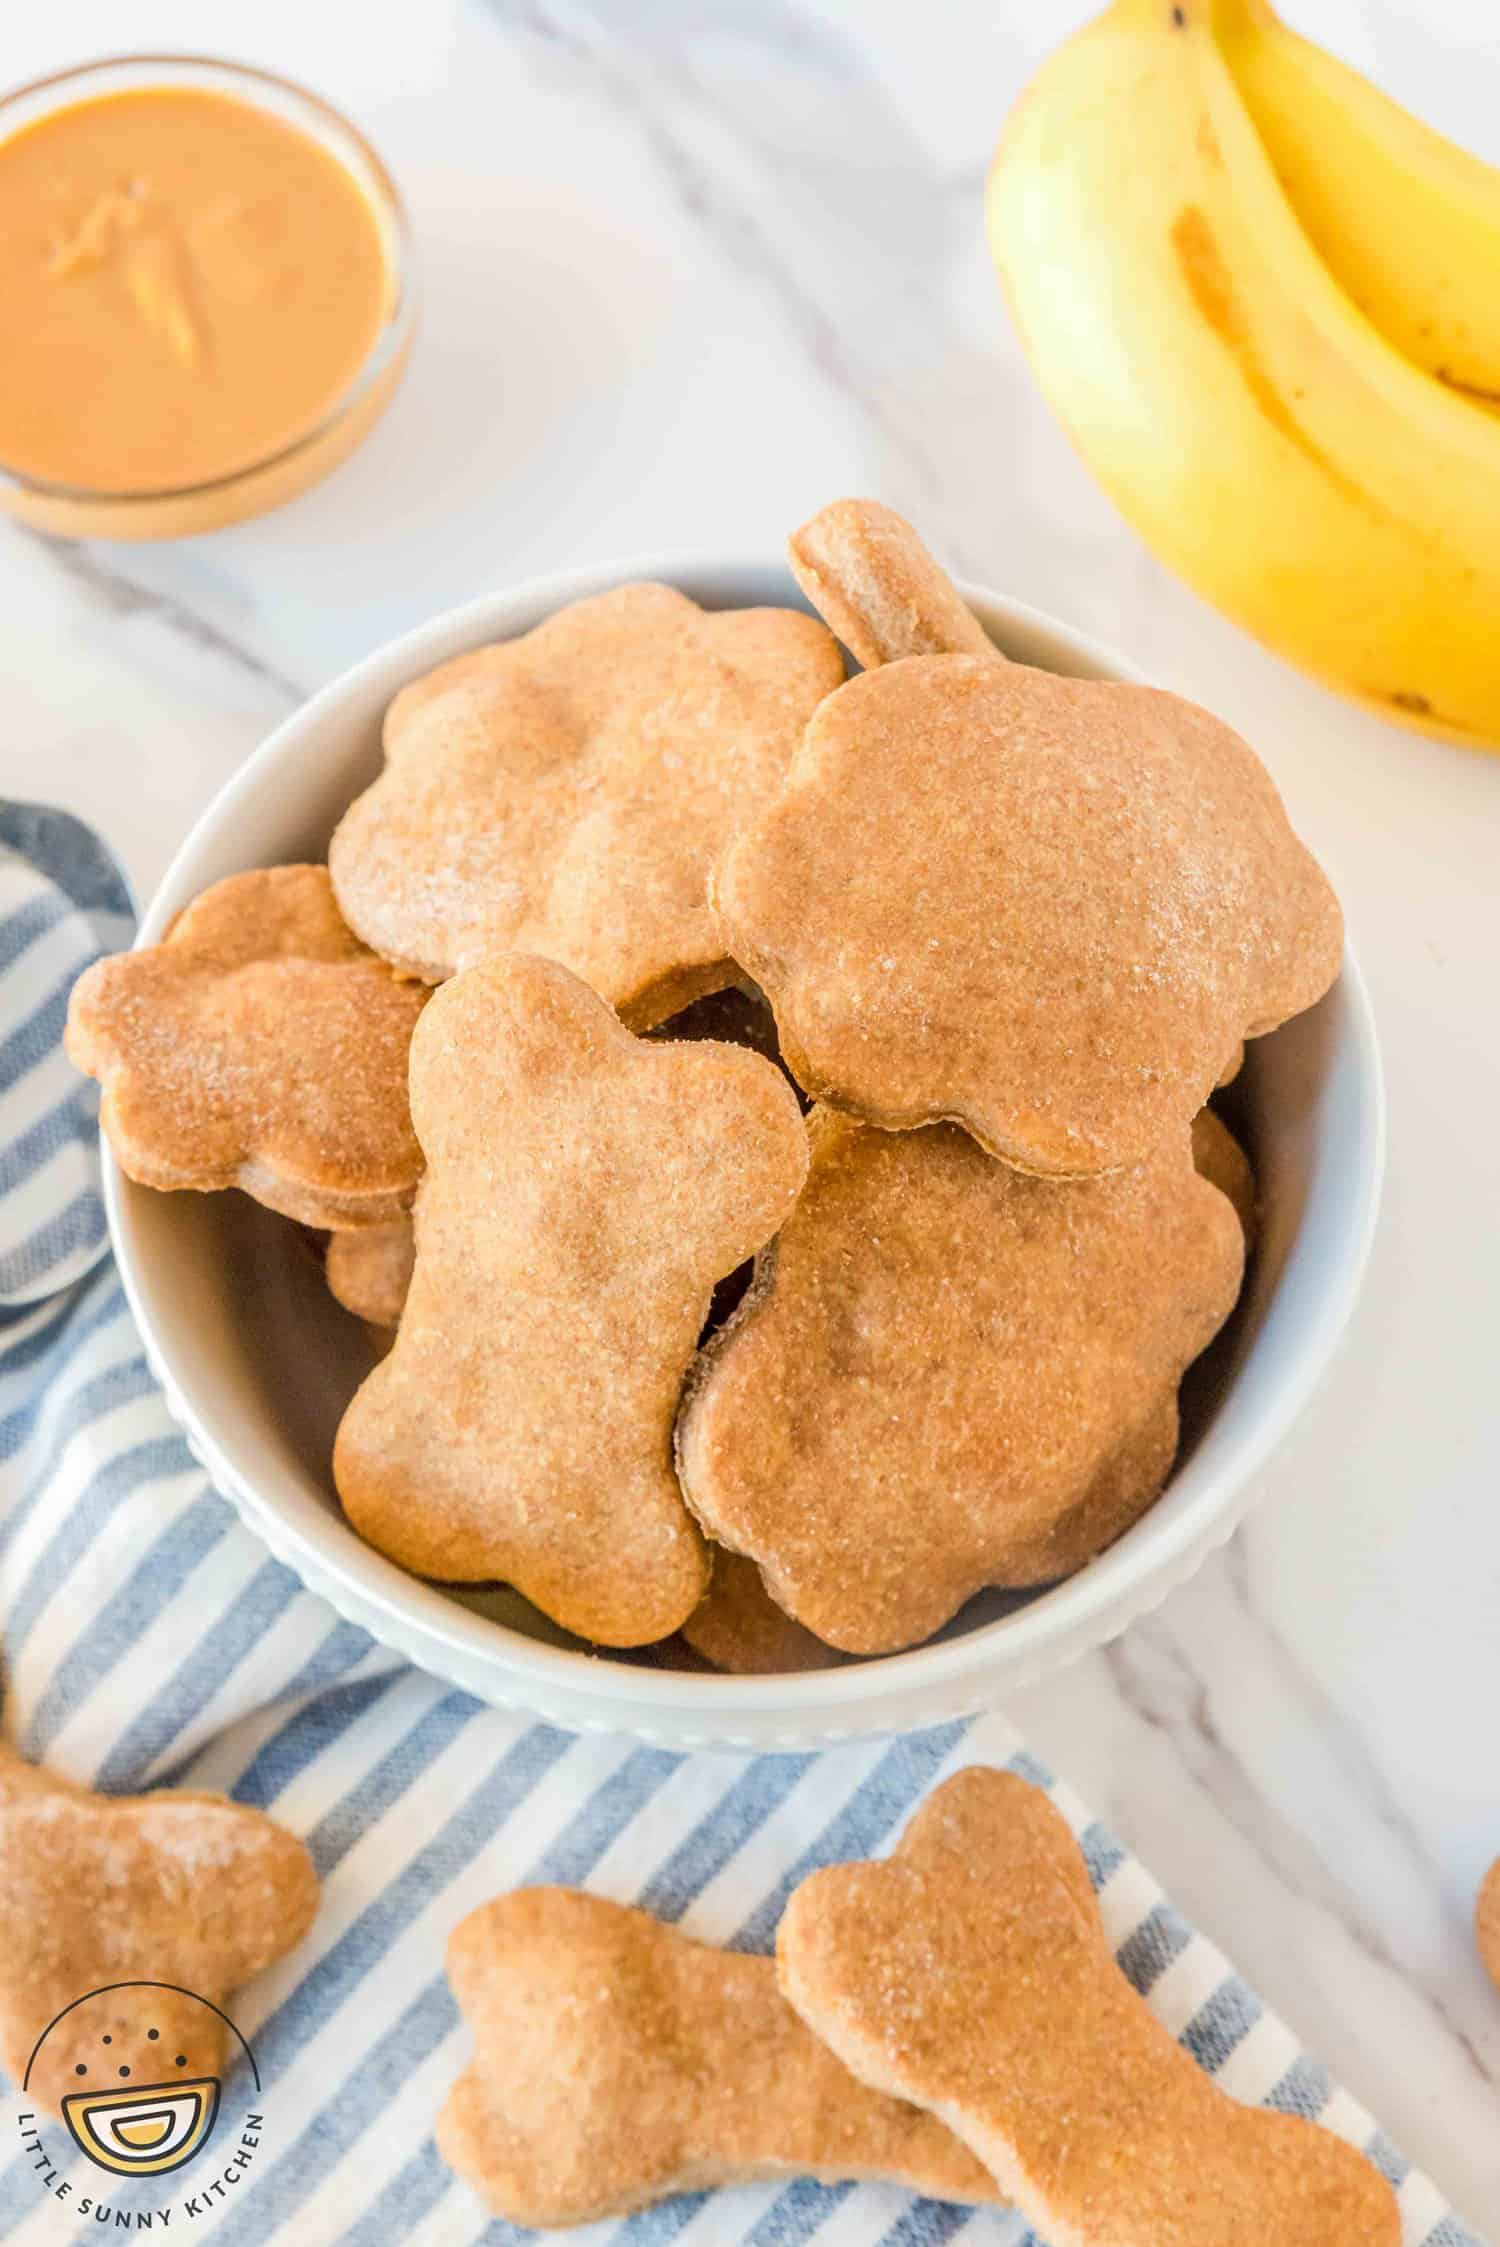 Peanut Butter Dog Treats With No Sticking! Another Silicone Pan